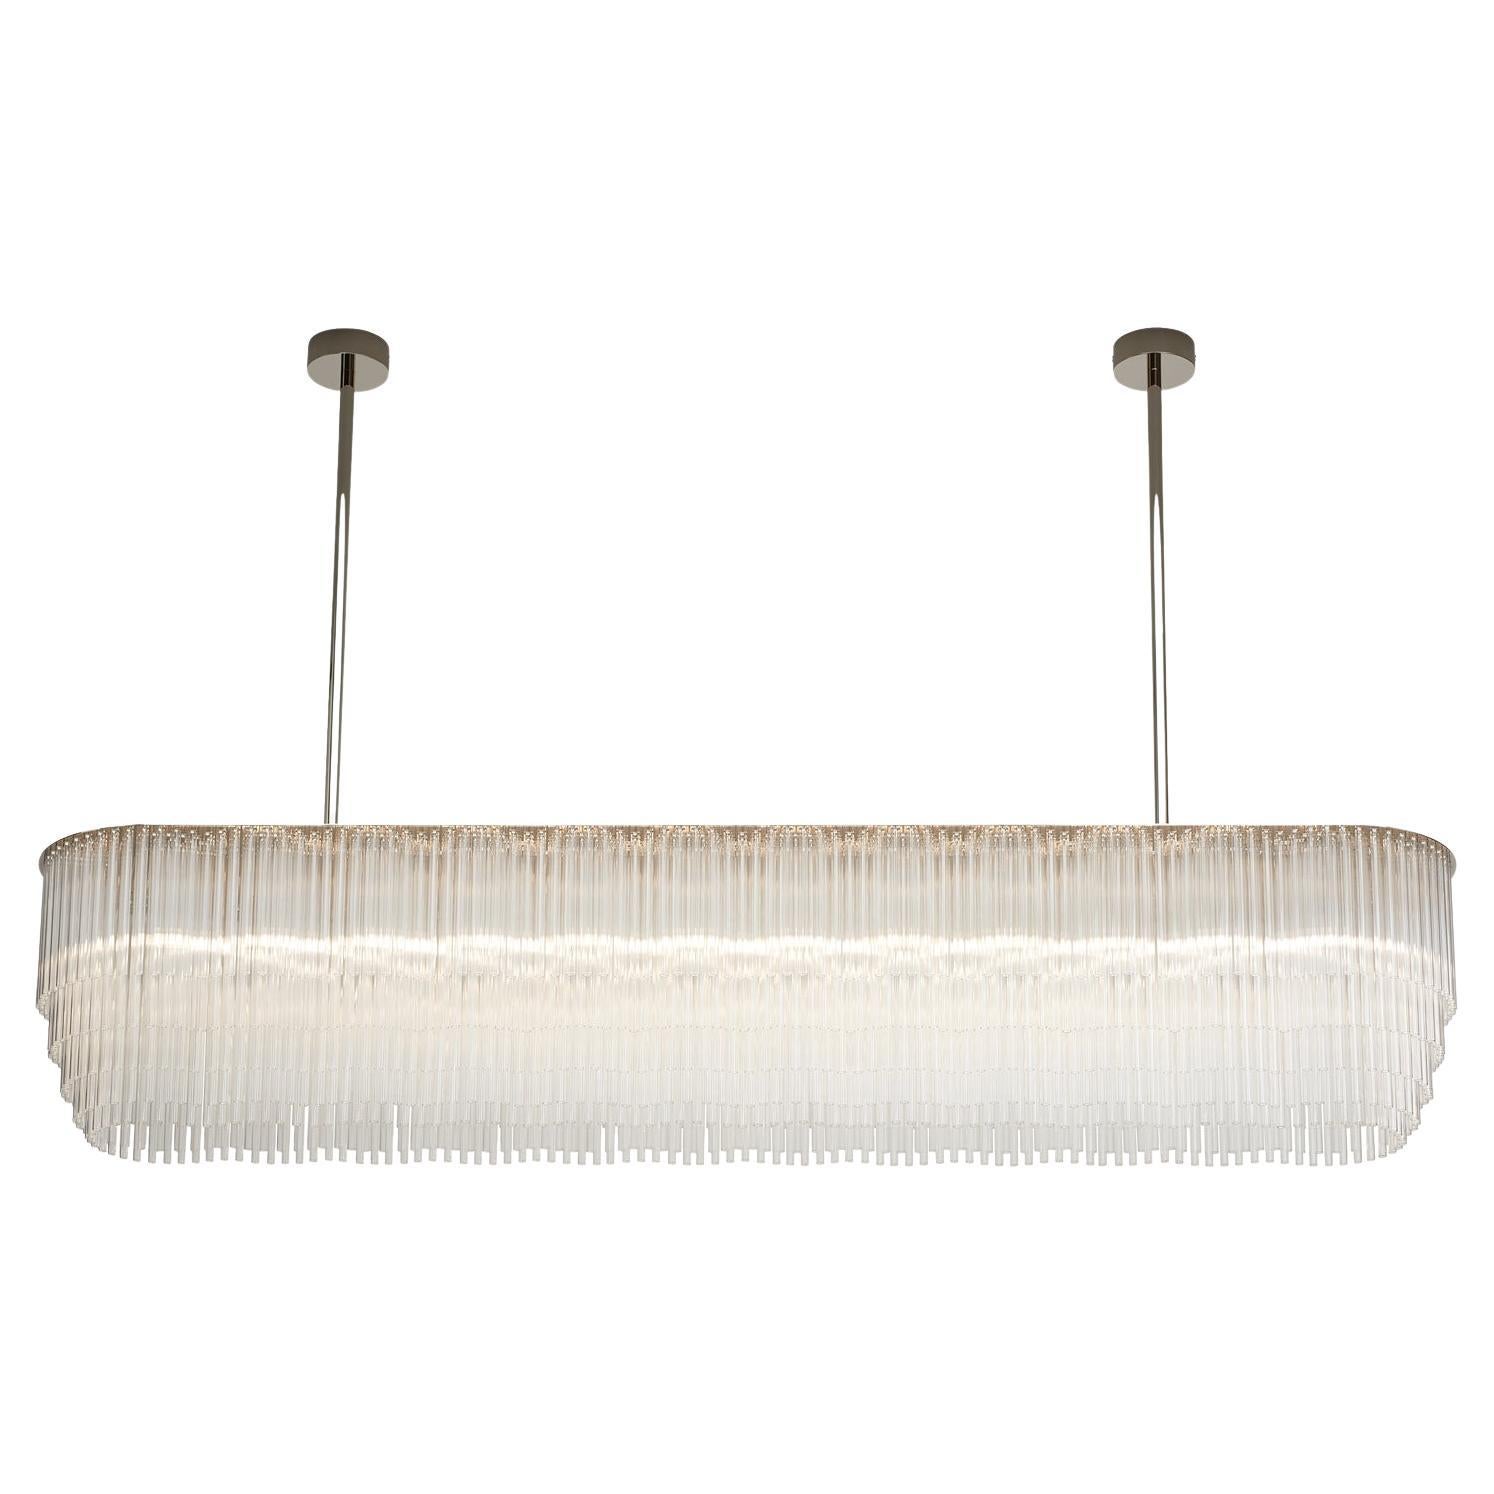 Linear Chandelier 1588mm / 62.5" in Polished Chrome with Tiered Glass Profile For Sale